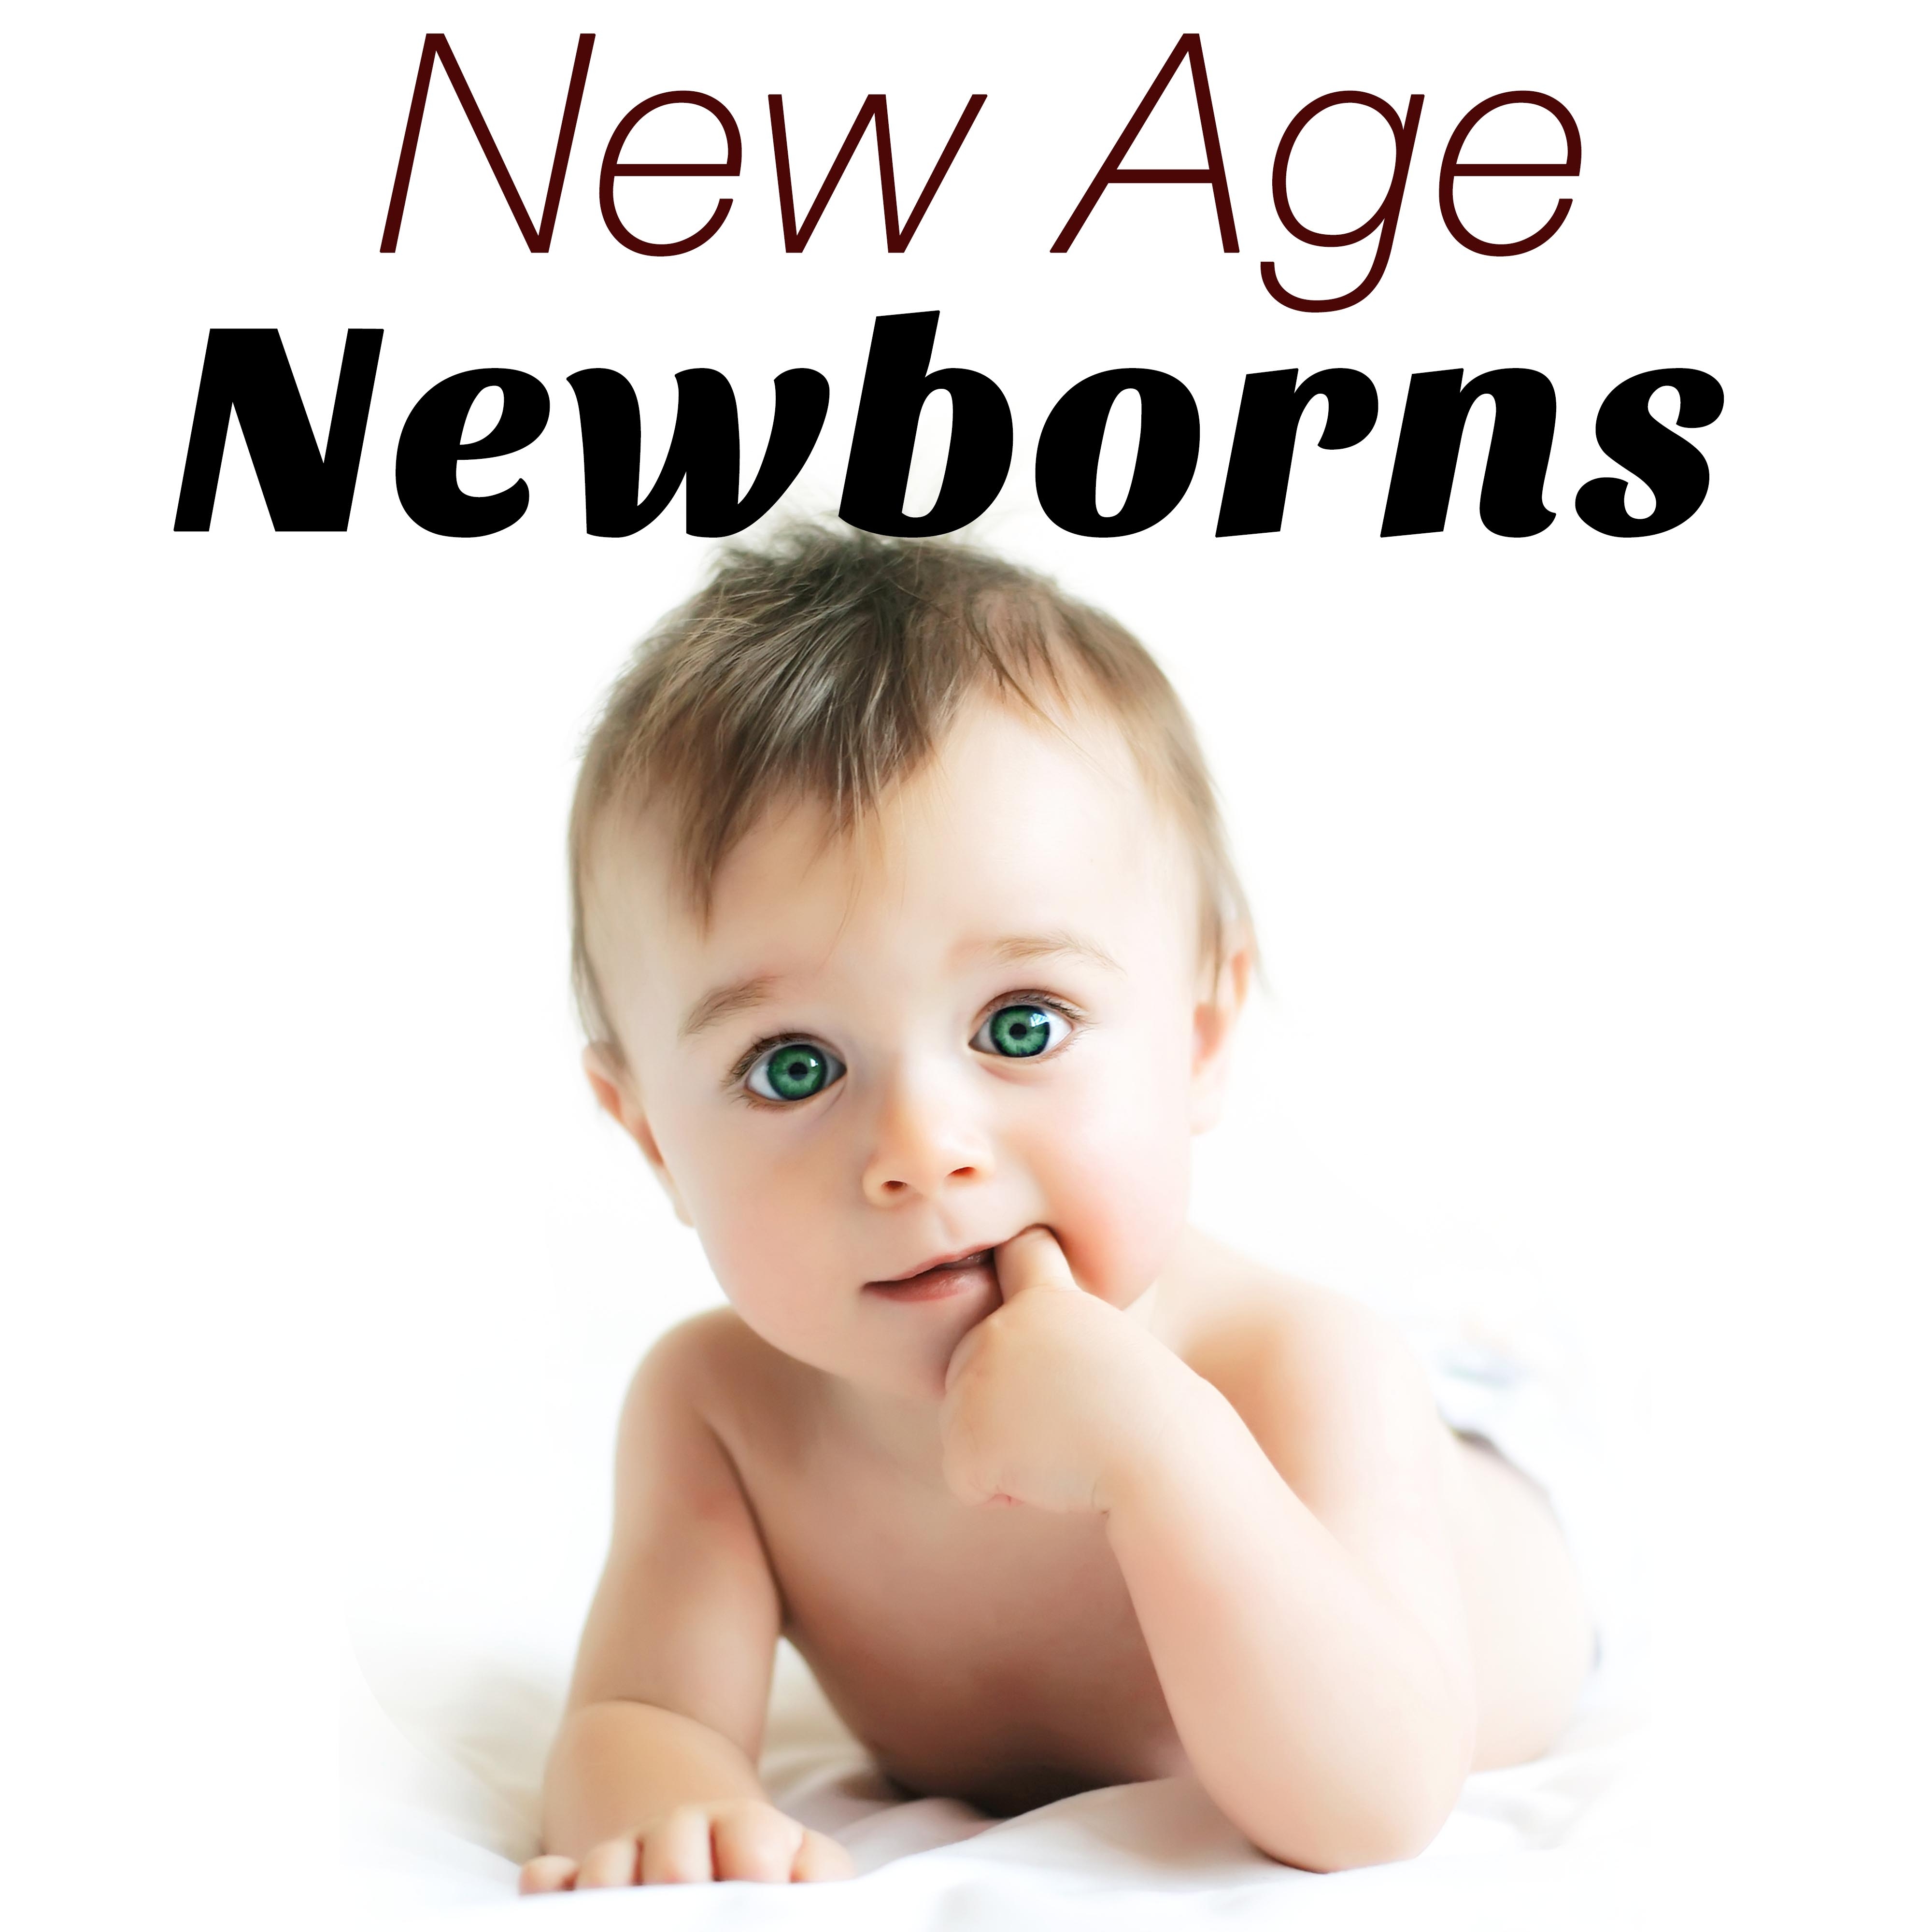 New Age Newborns: Amazing Soothing Songs to help Relax Babies, Toddlers and Pregnant Mothers with Nature Sounds, Rain, Ocean and Wind